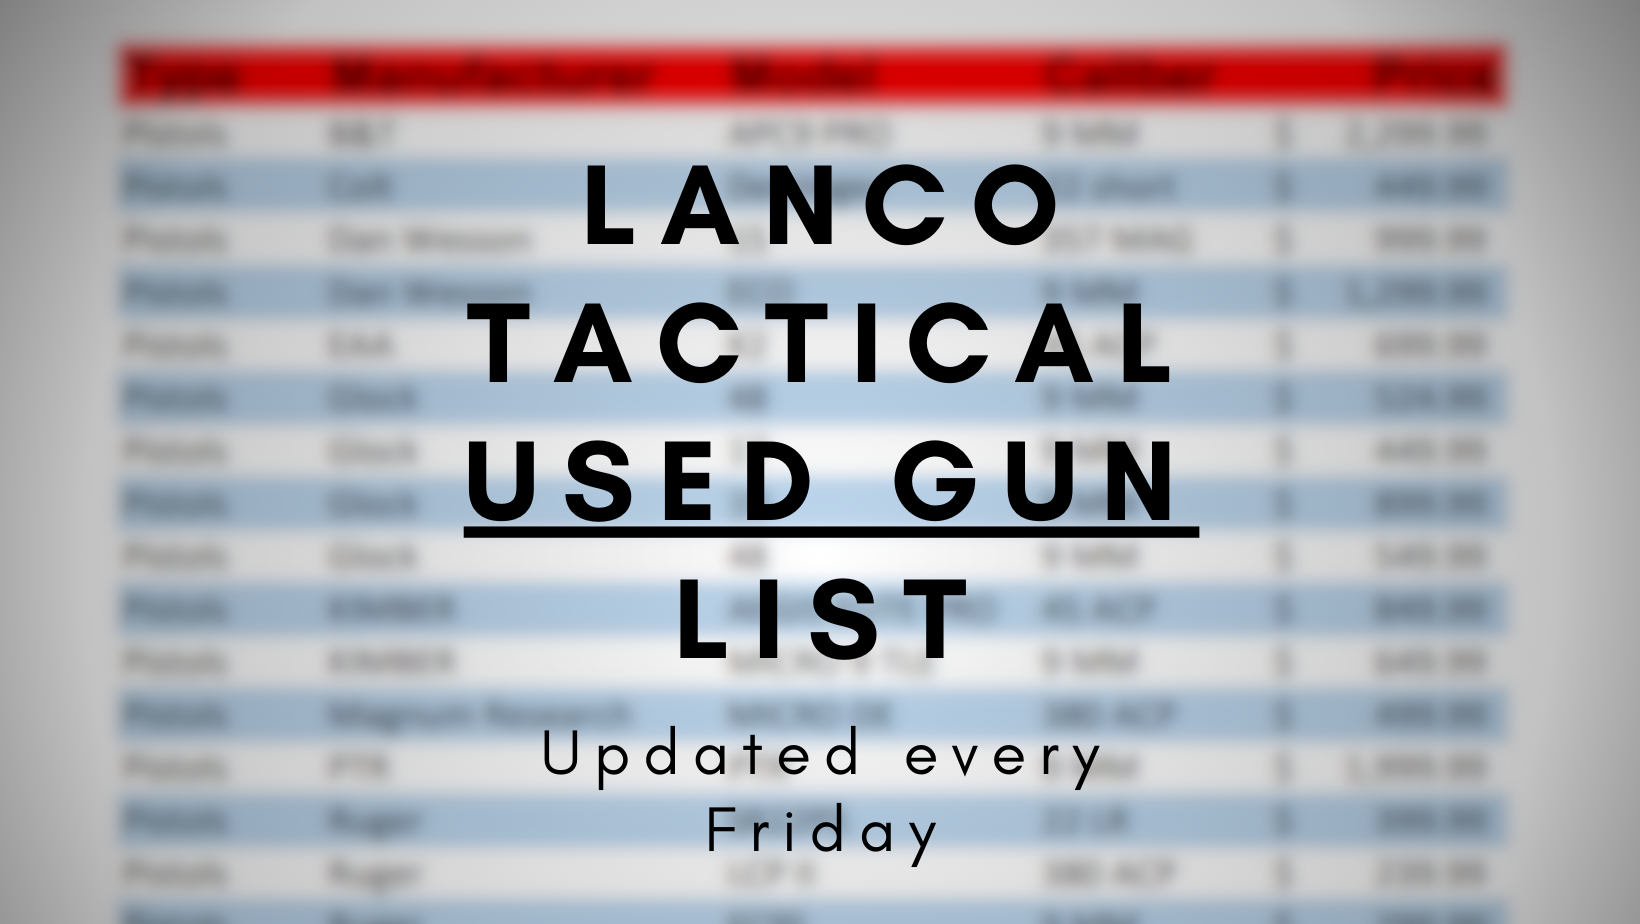 https://www.lancotactical.com/pages/used-guns